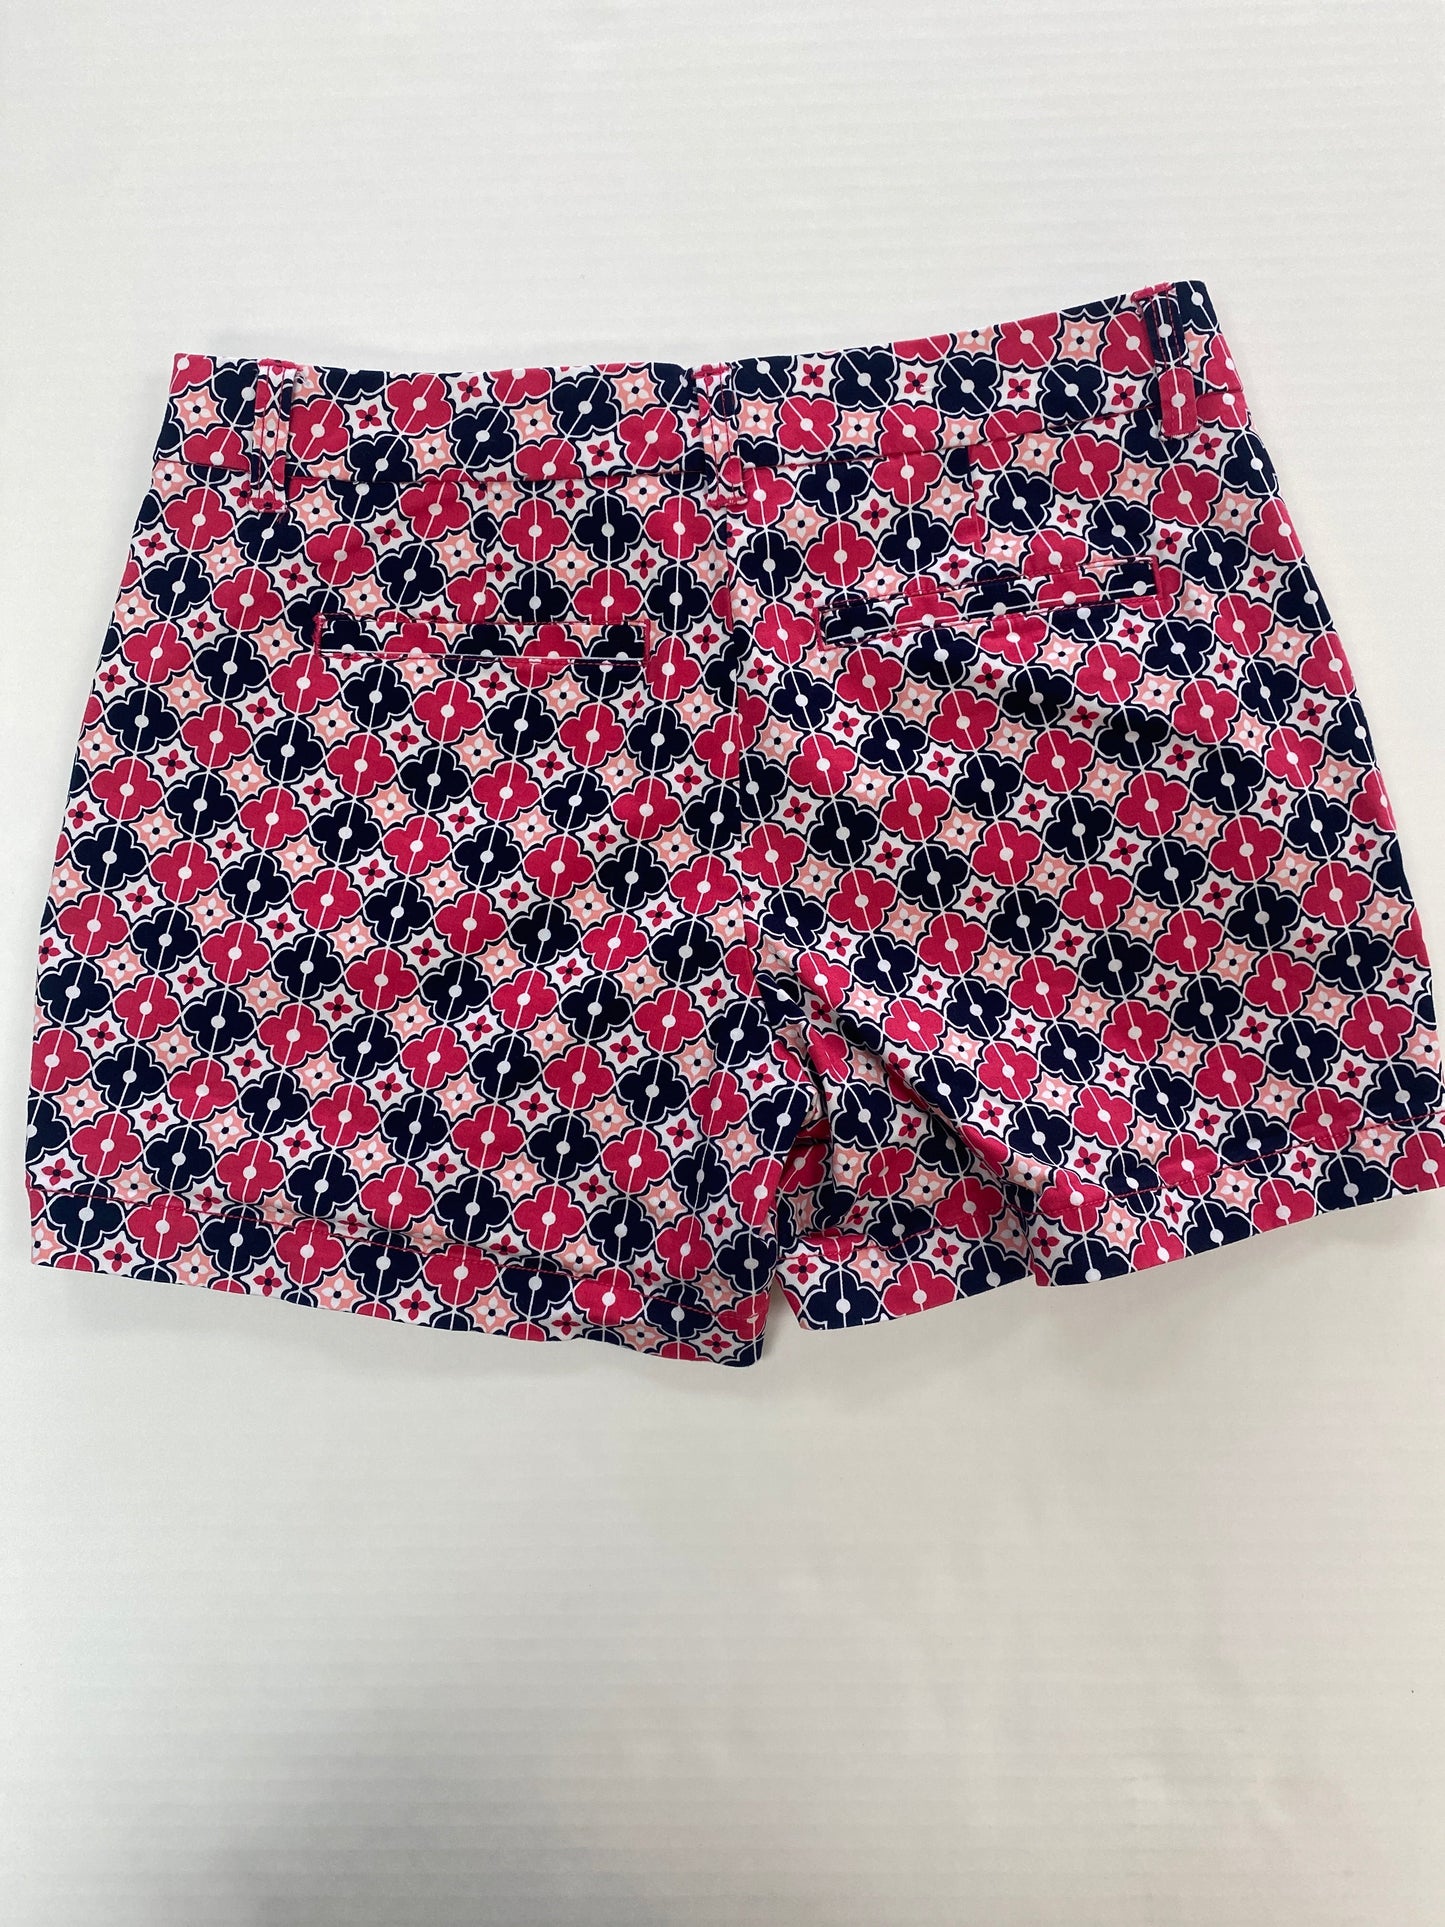 Shorts By Crown And Ivy  Size: 6